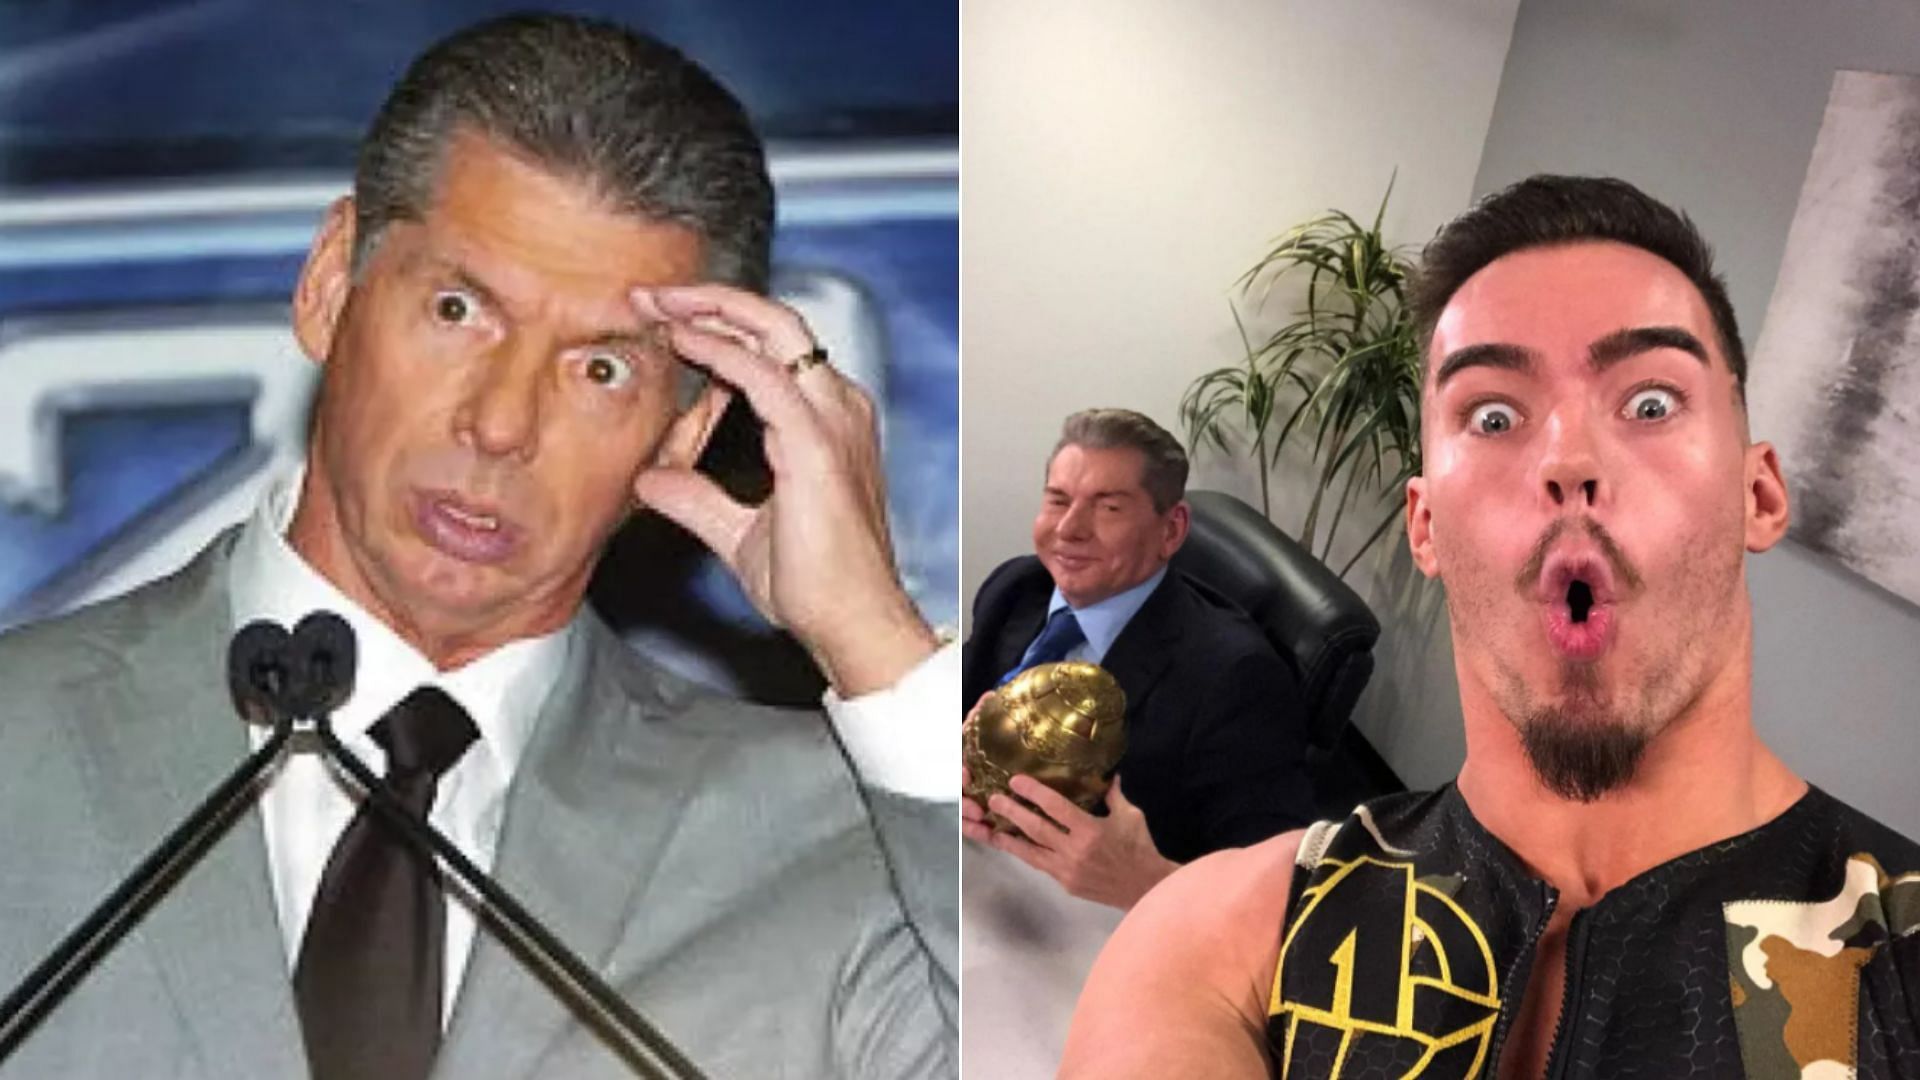 Vince McMahon and Austin Theory have been together onscreen several times over the last few months